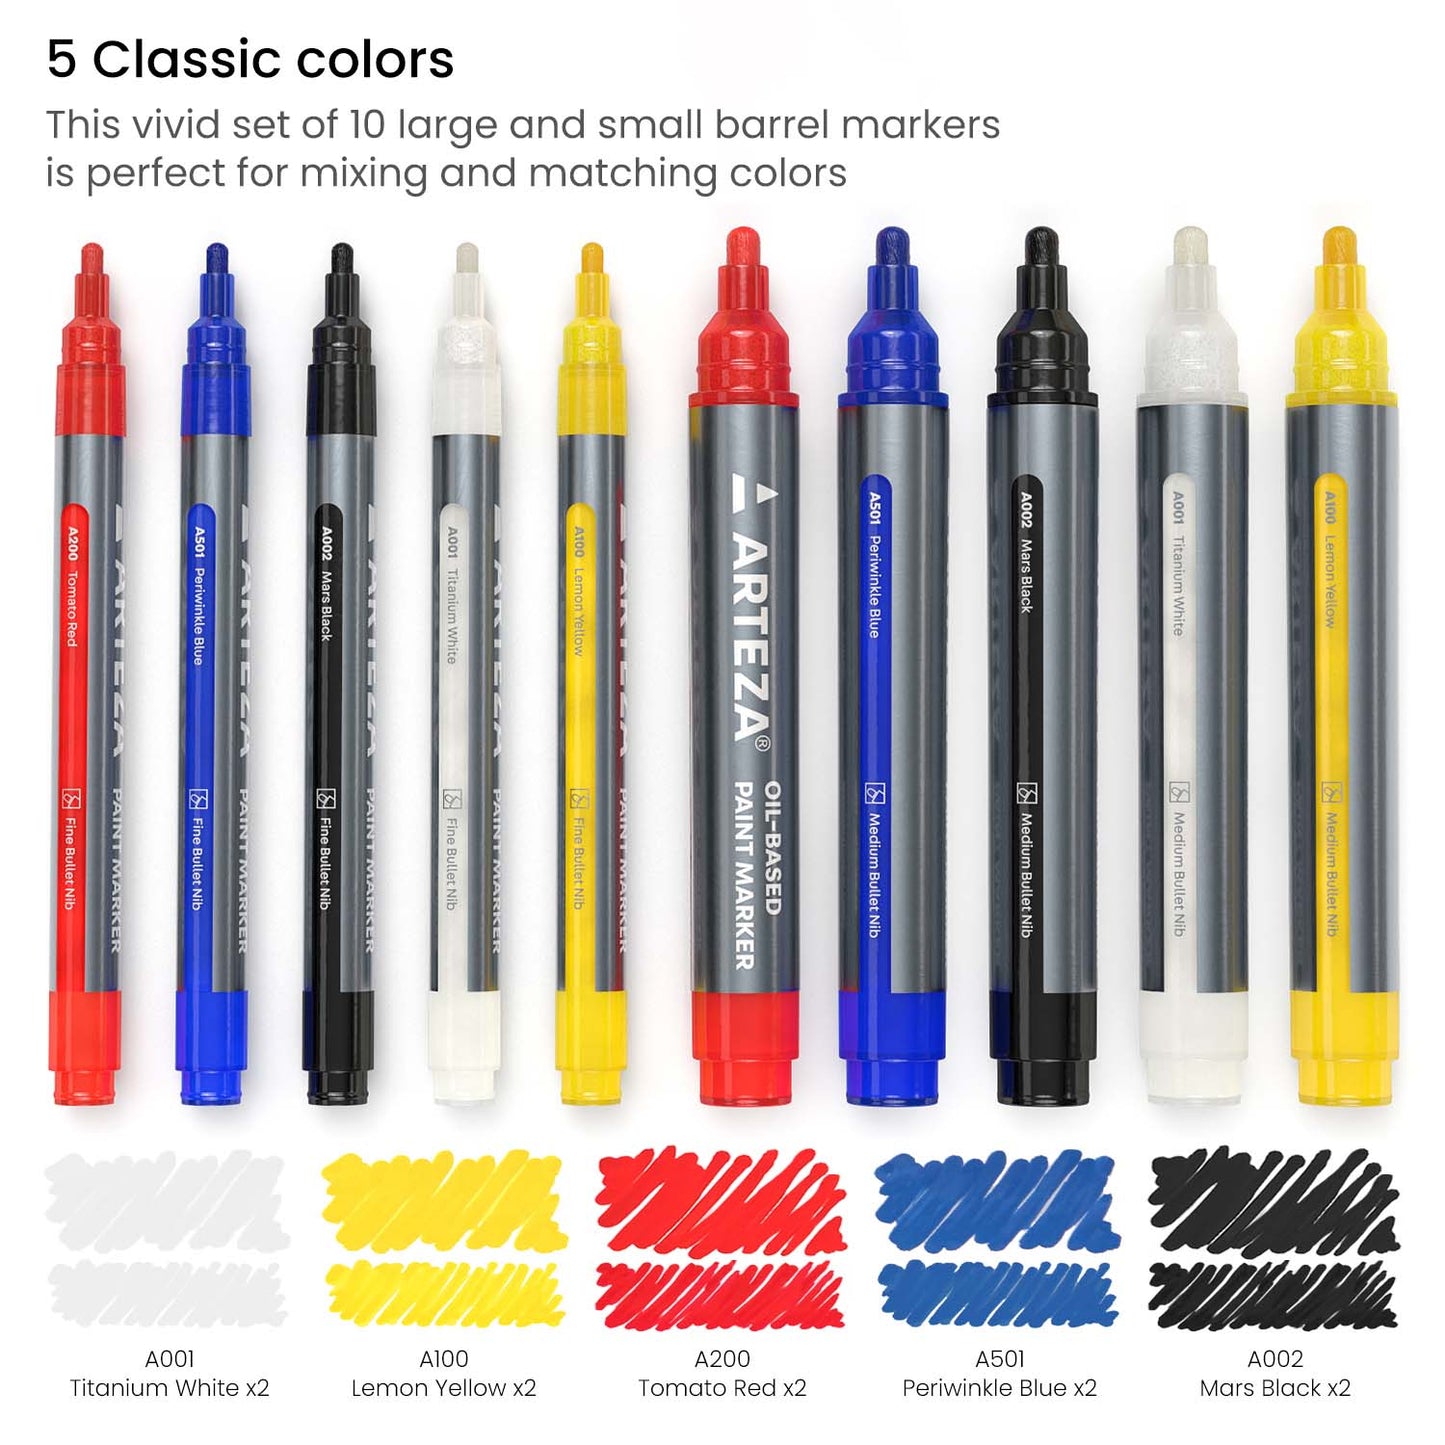 Arteza Classic Oil Based Paint Markers